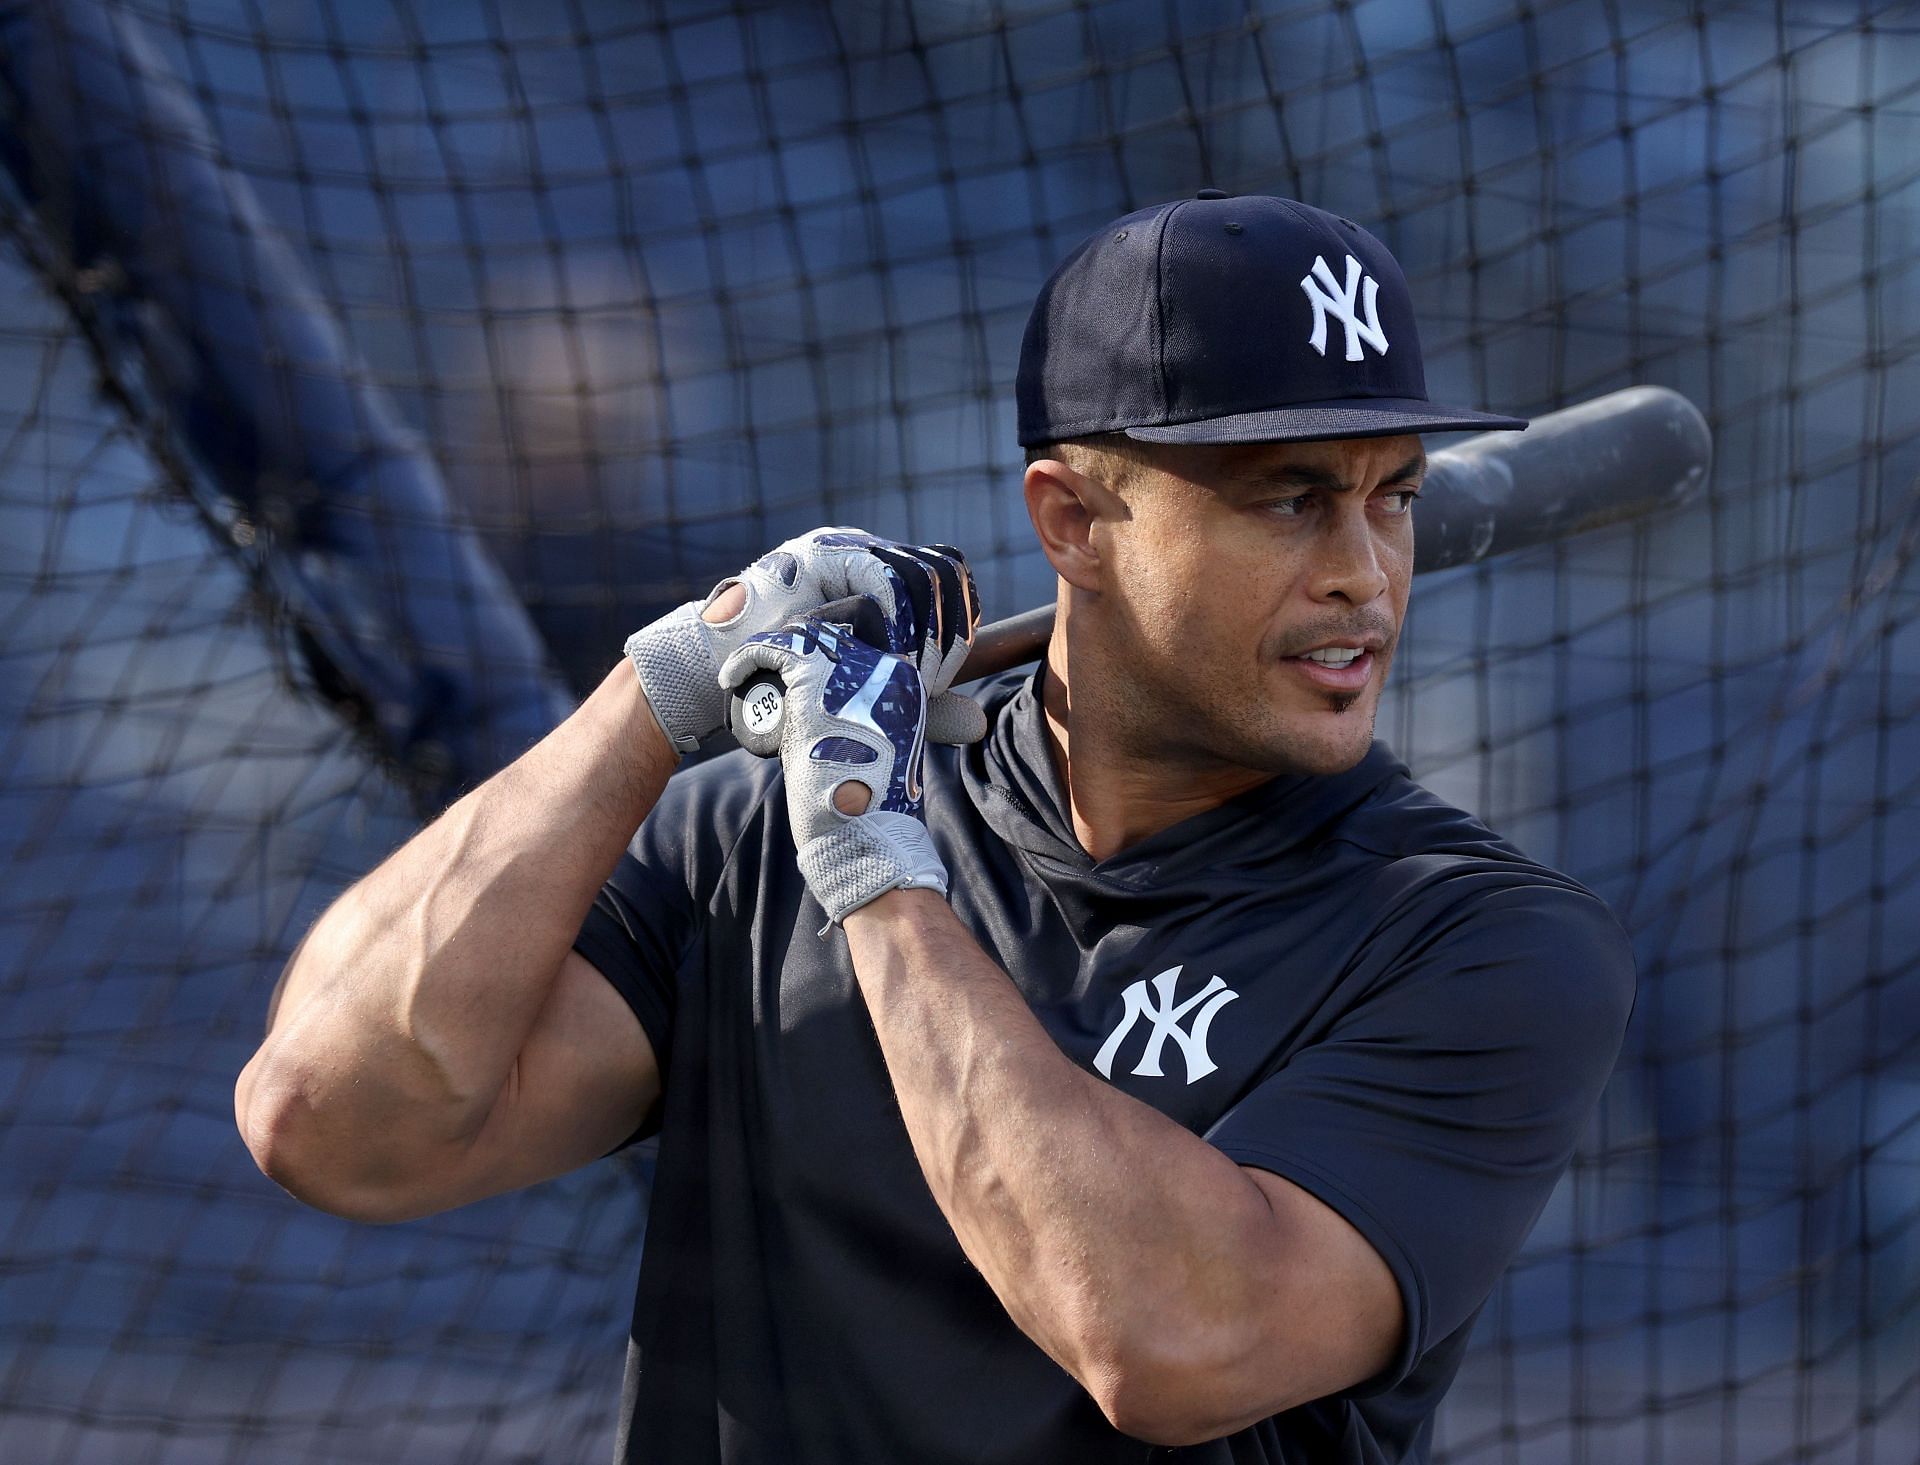 New York Yankees fans do not have high hopes for Giancarlo